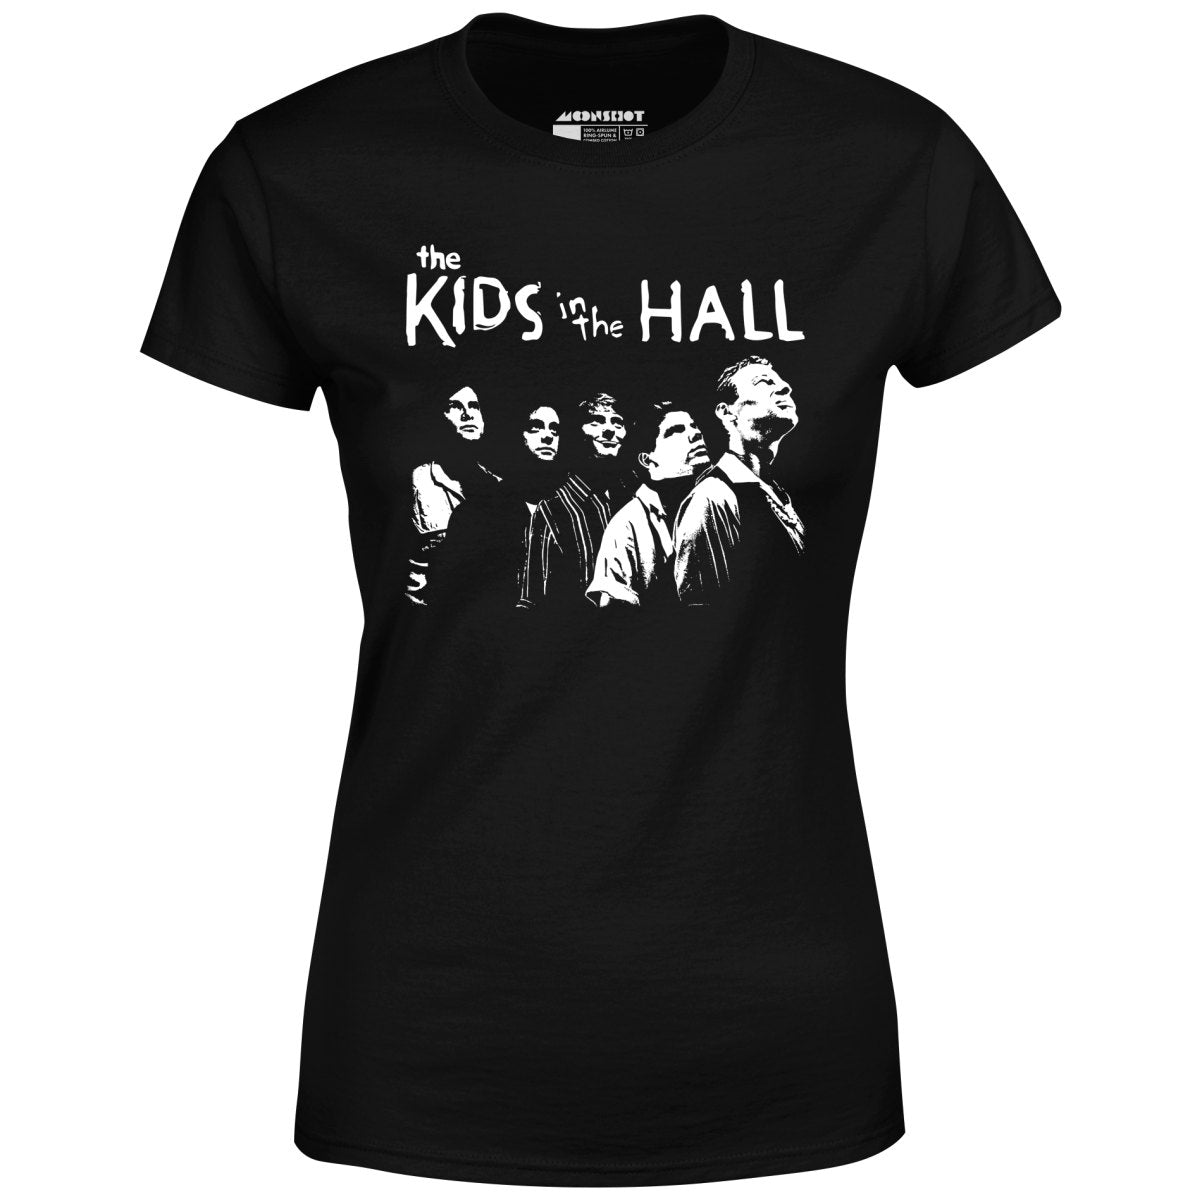 The Kids in The Hall - Women's T-Shirt